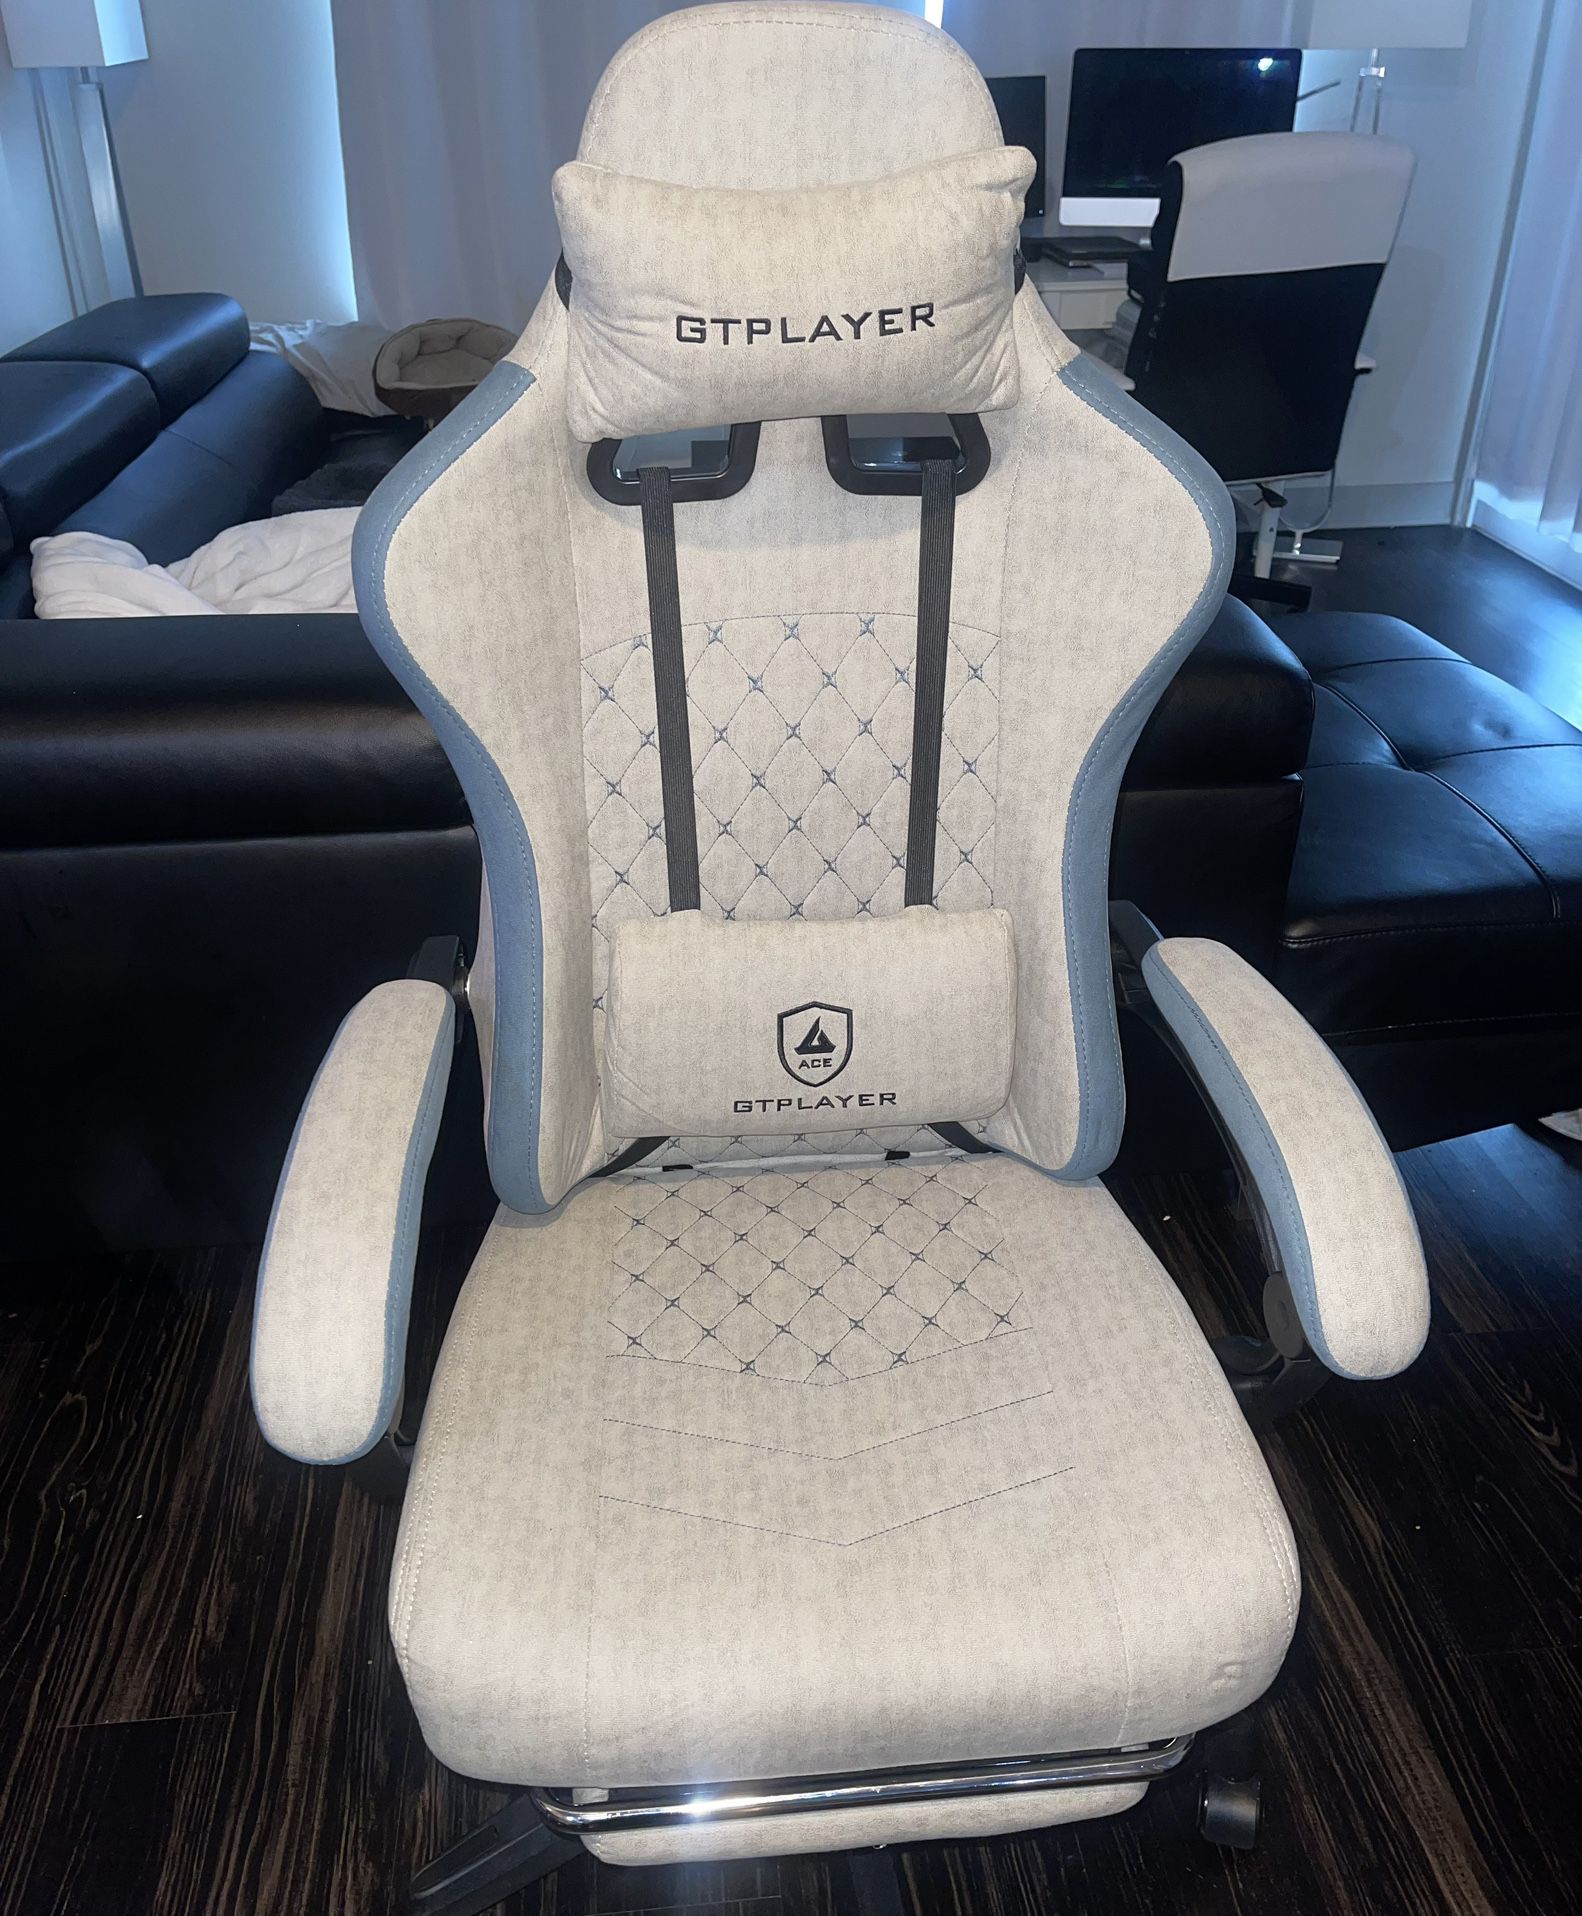 GTPLAYER Gaming Chair with Footrest Fabric Office Chair with Pocket Spring Cushion